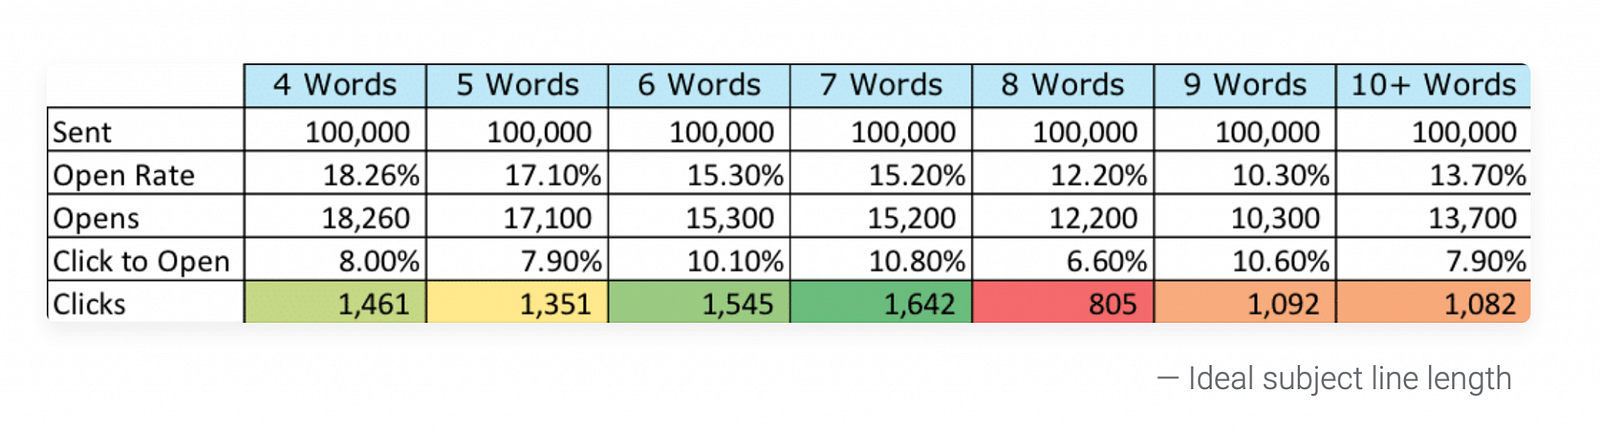 Number of words for ideal subject line study